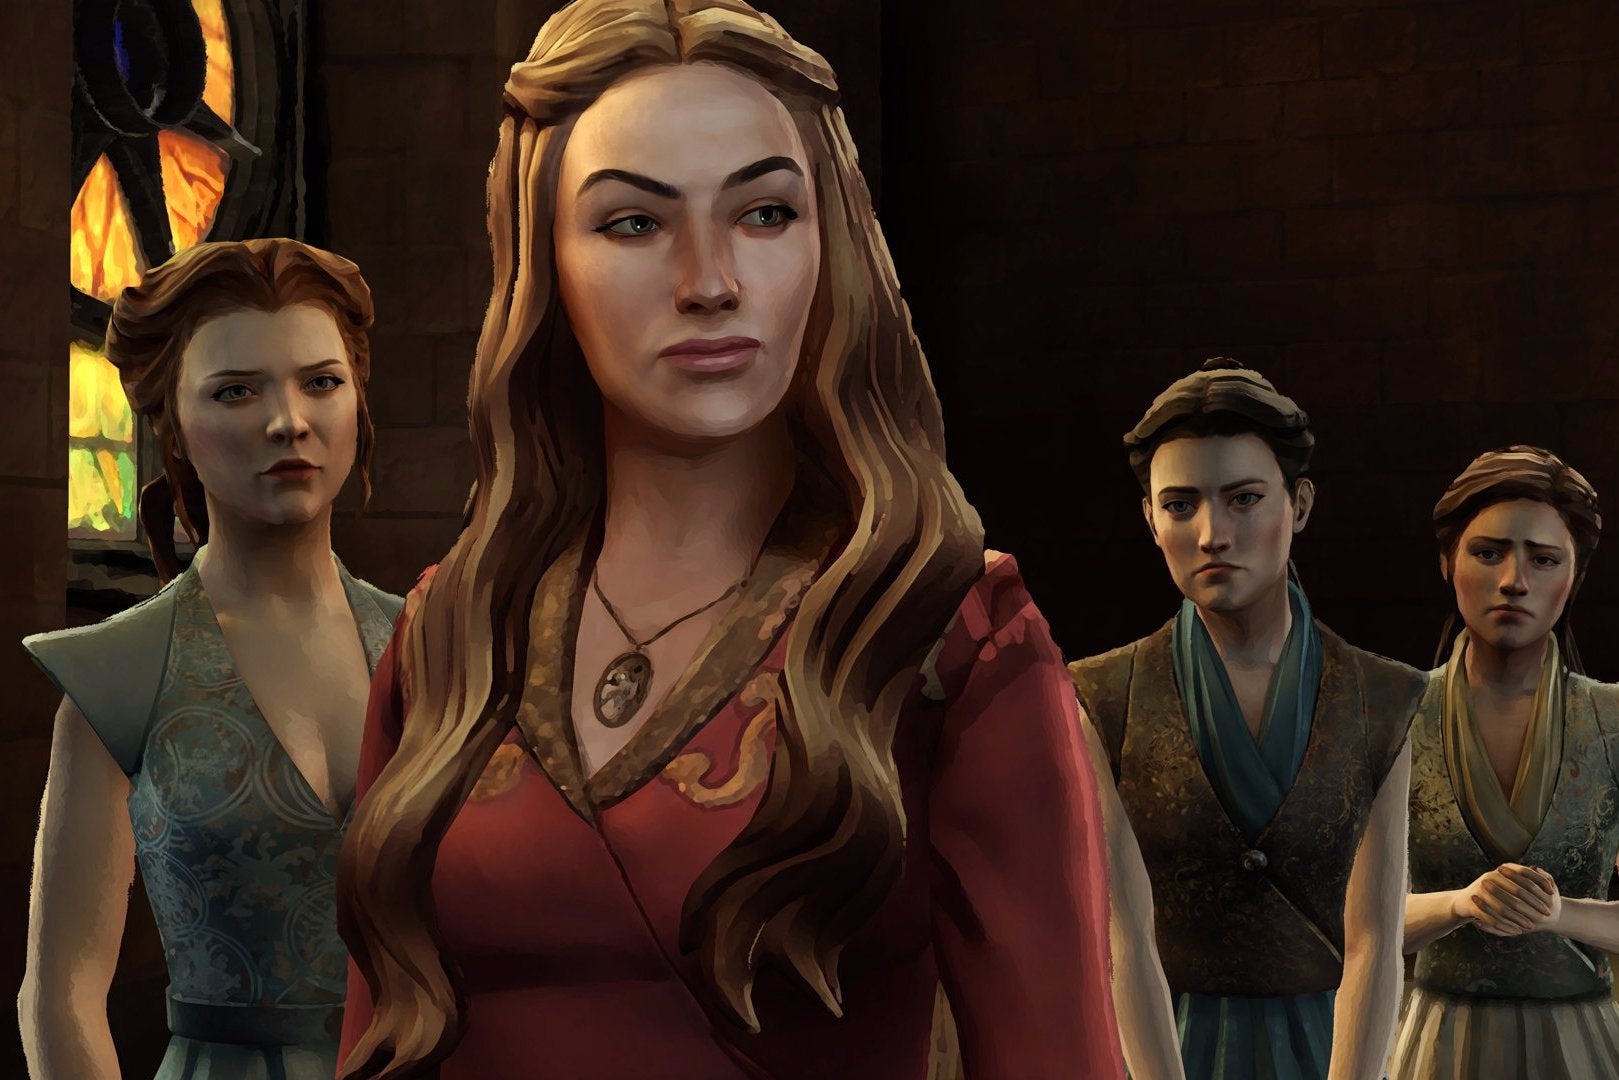 Image for Game of Thrones: Episode 3 is due this week on all platforms